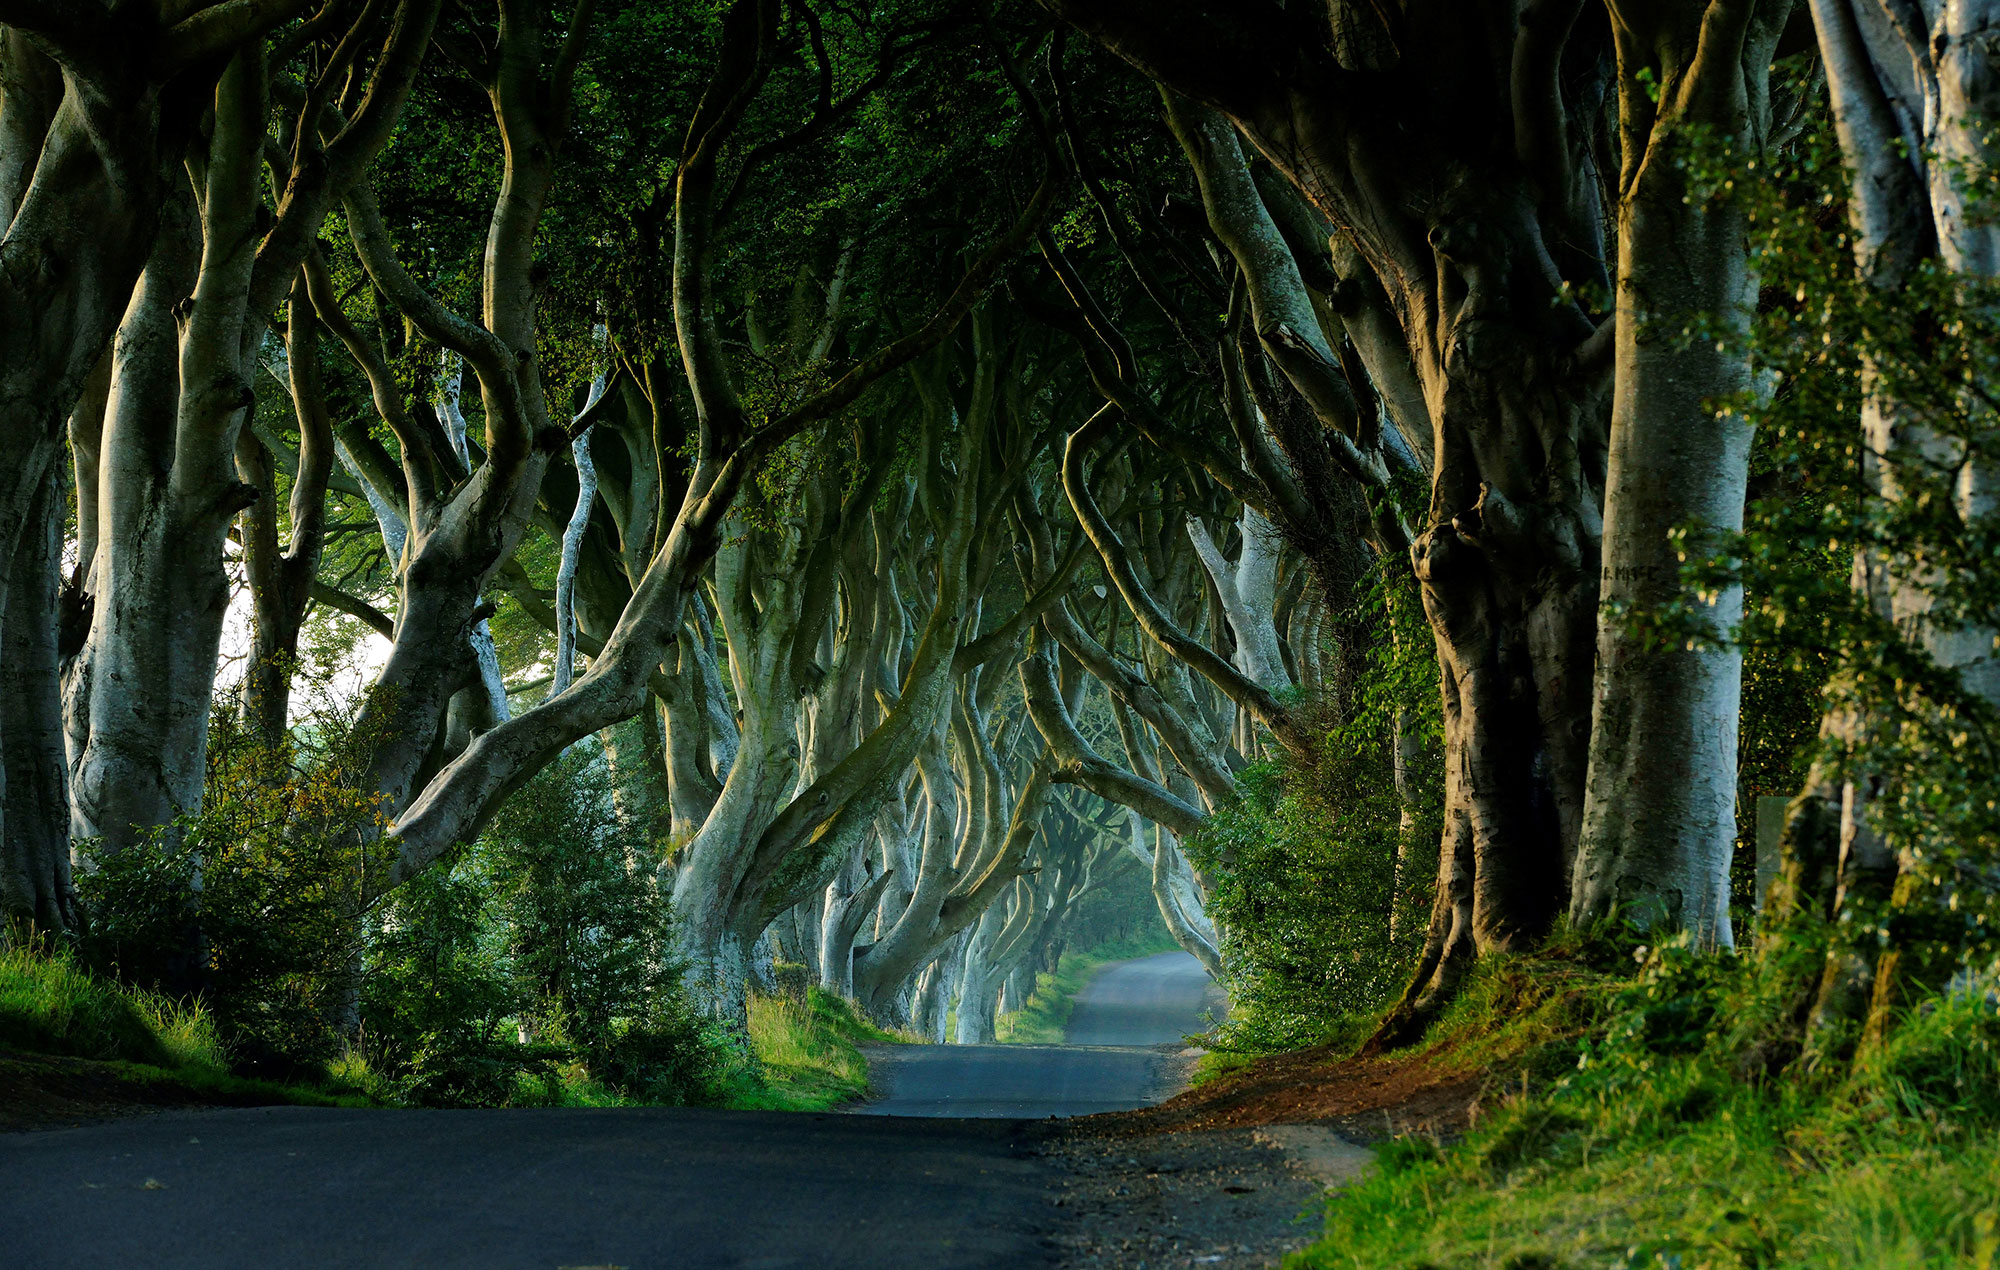 ‘Game Of Thrones’ famous trees are to be destroyed